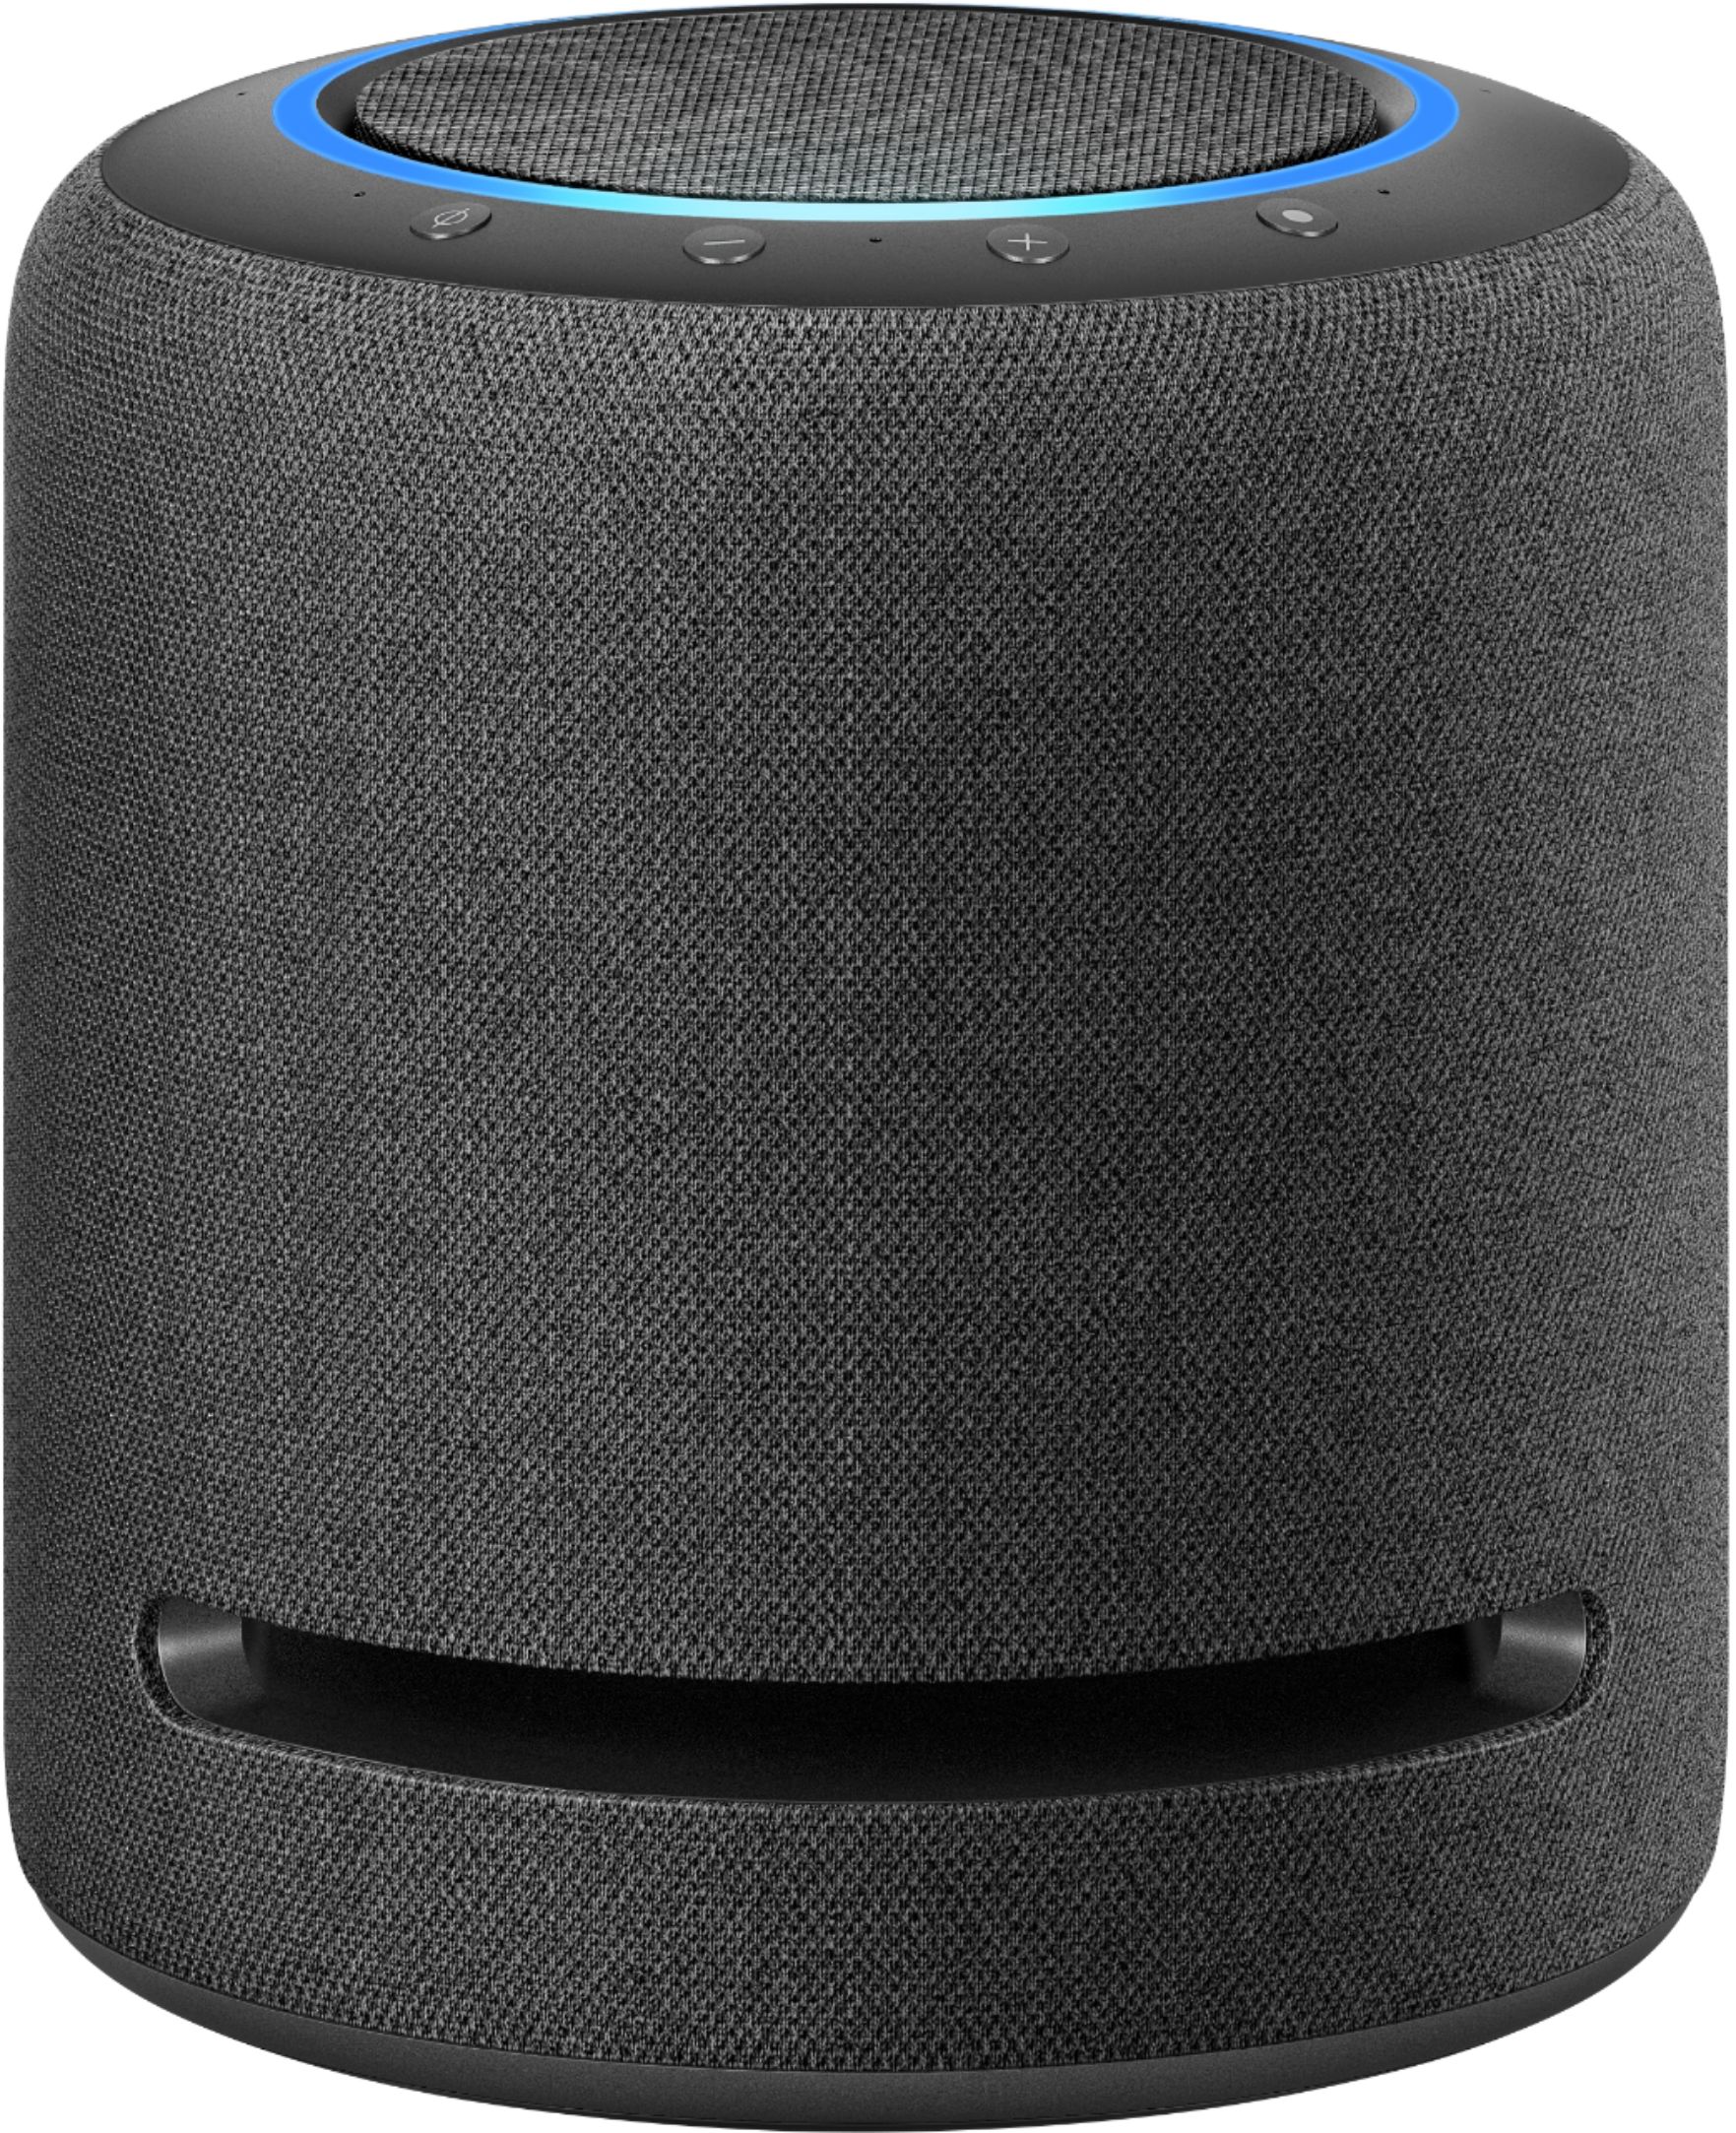 Amazon Echo Studio Hi-Res 330W Smart Speaker with Dolby Atmos and 